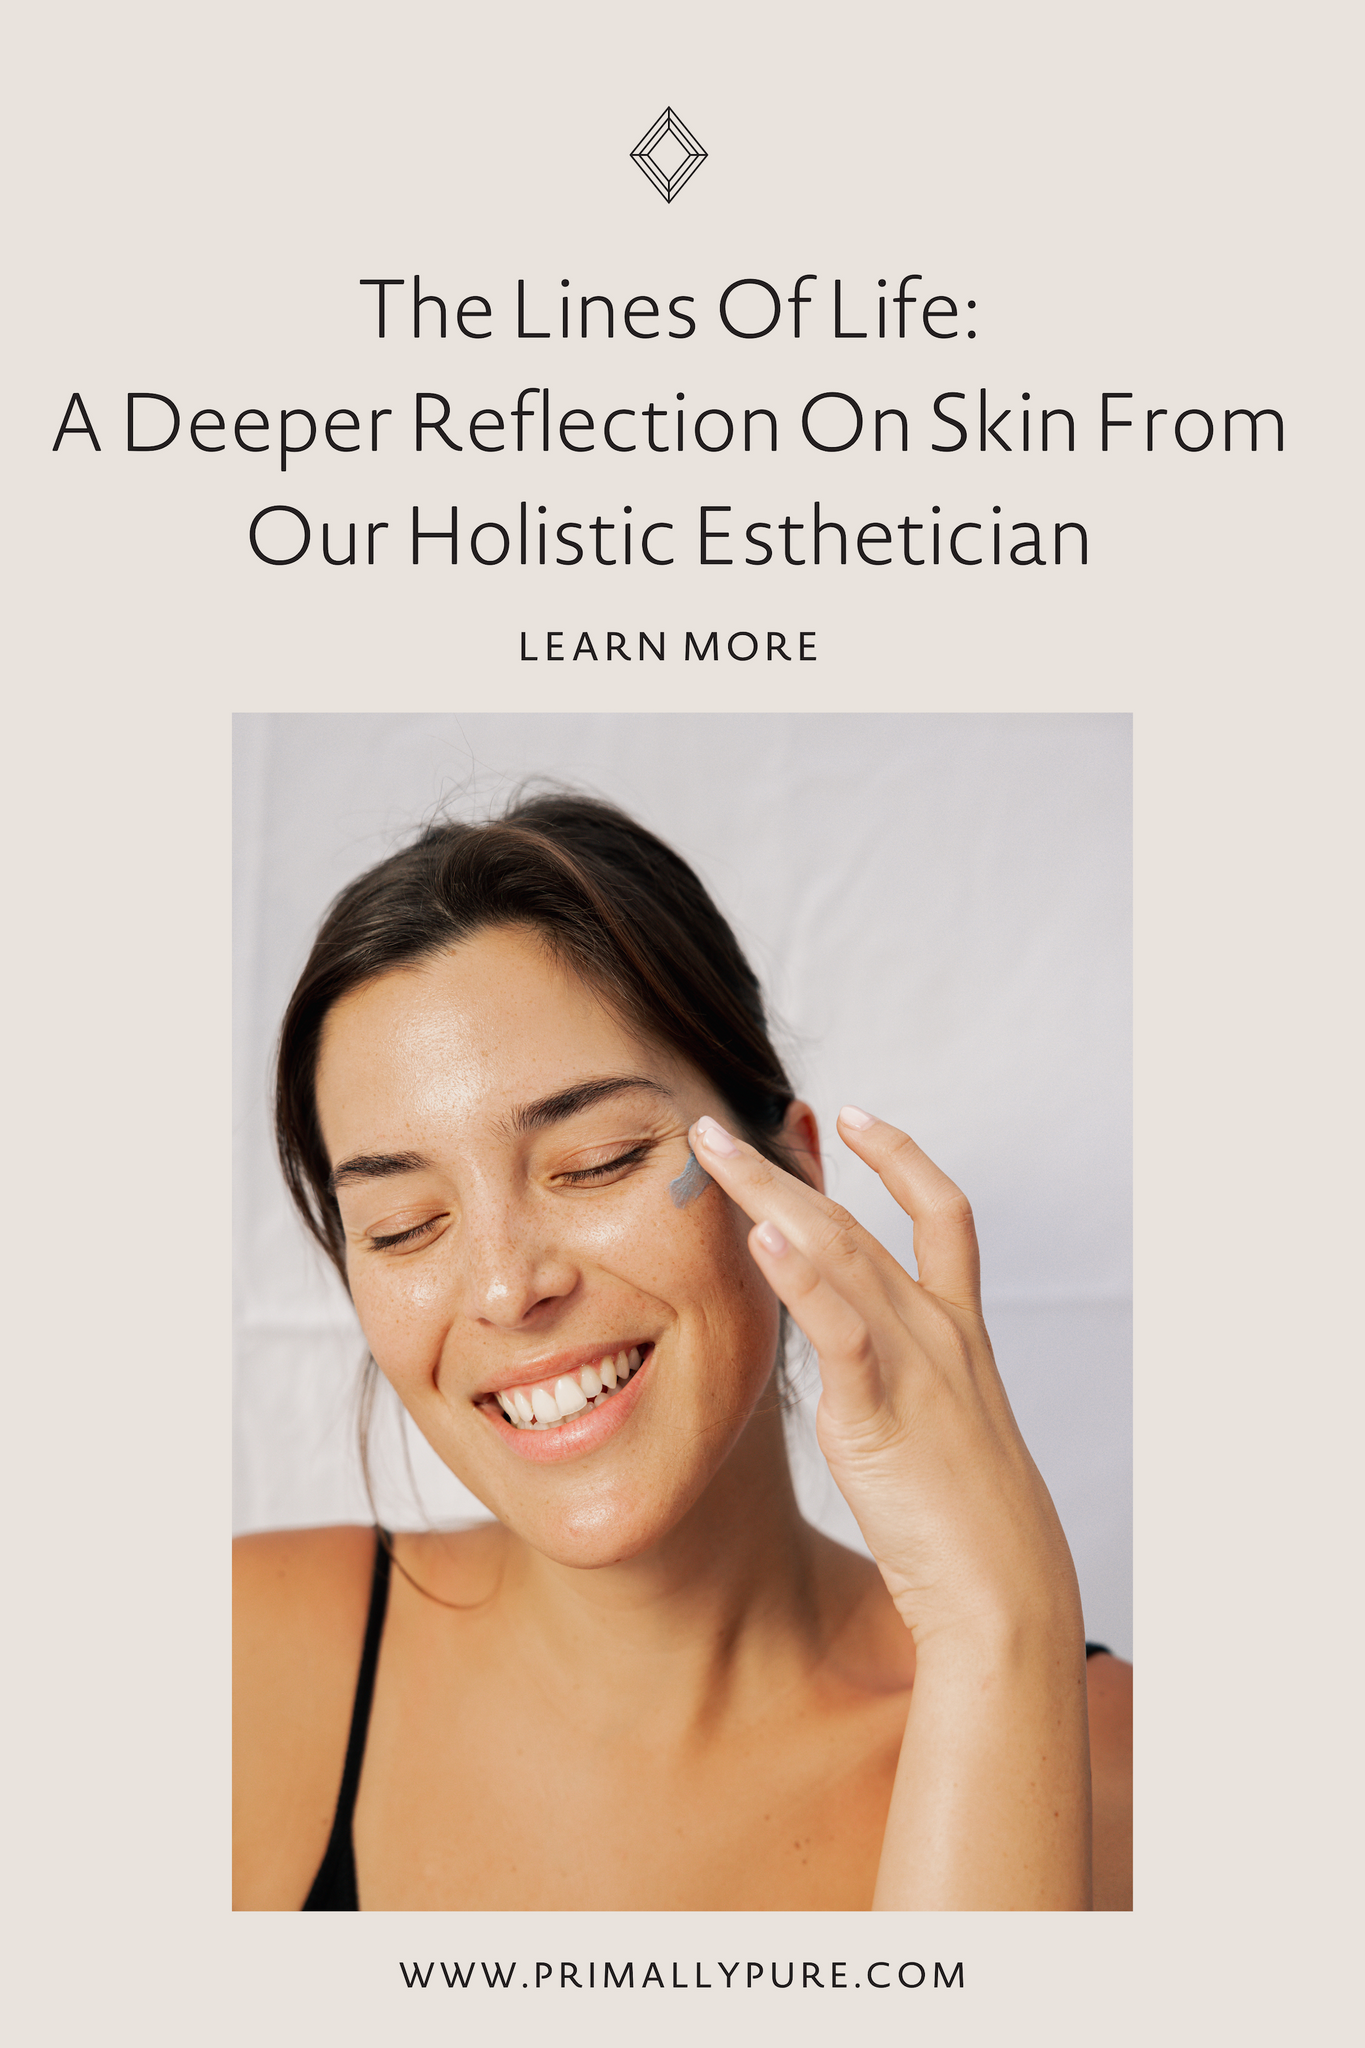 The Lines of Life: A Deeper Reflection On Skin From Our Holistic Esthetician | Primally Pure Skincare